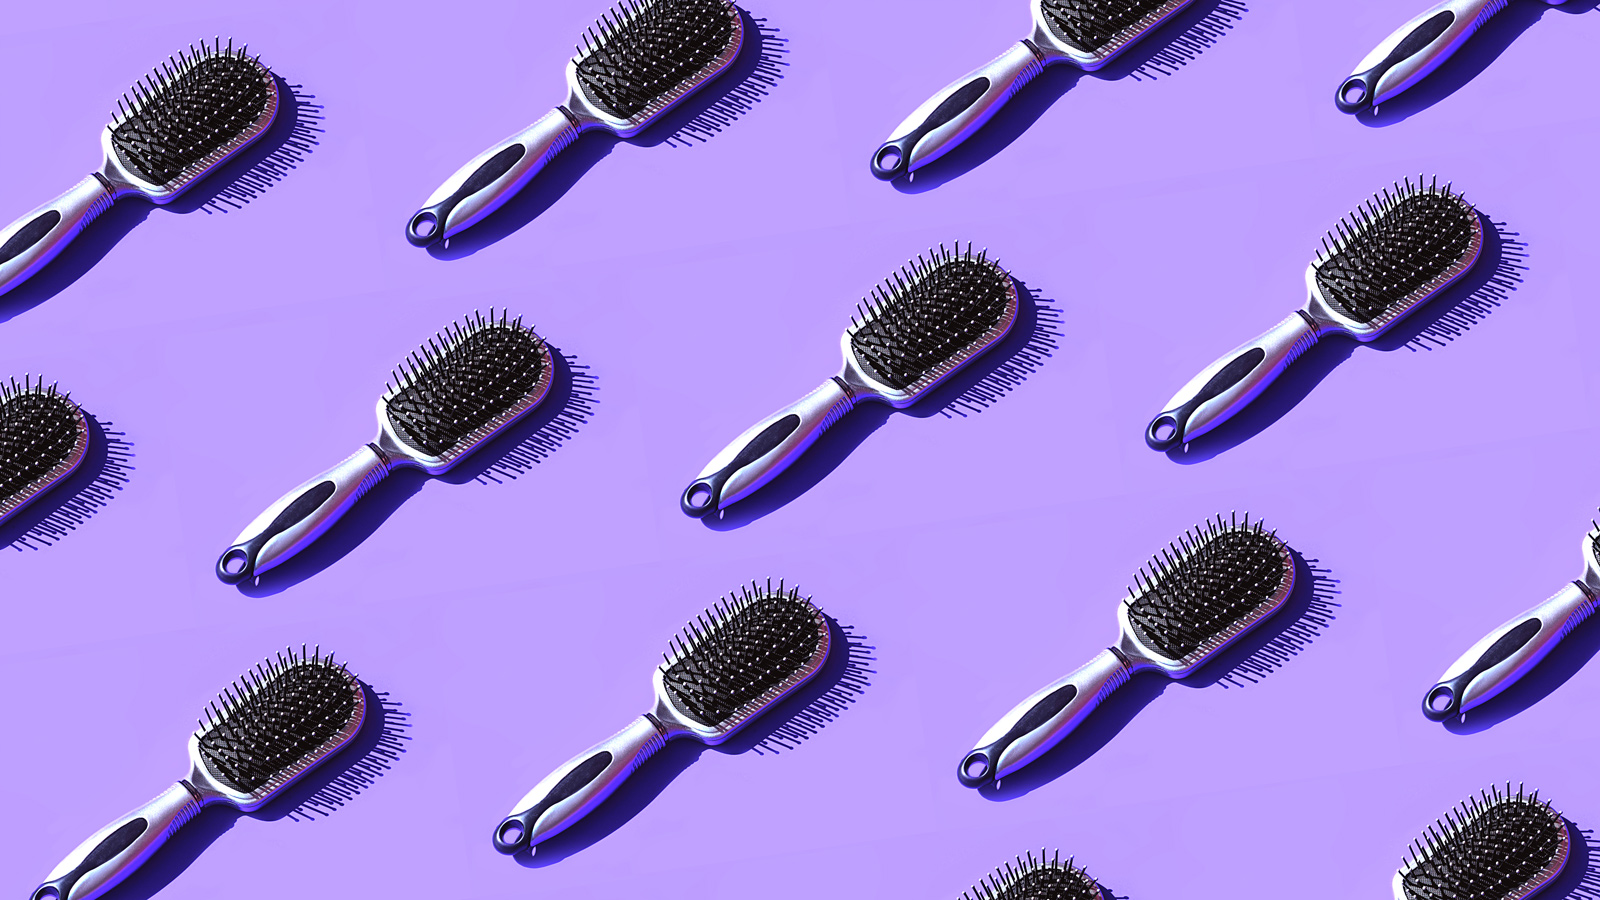 Trendy Beauty Product Pattern made of Hair Brush on pastel lavender violet background.